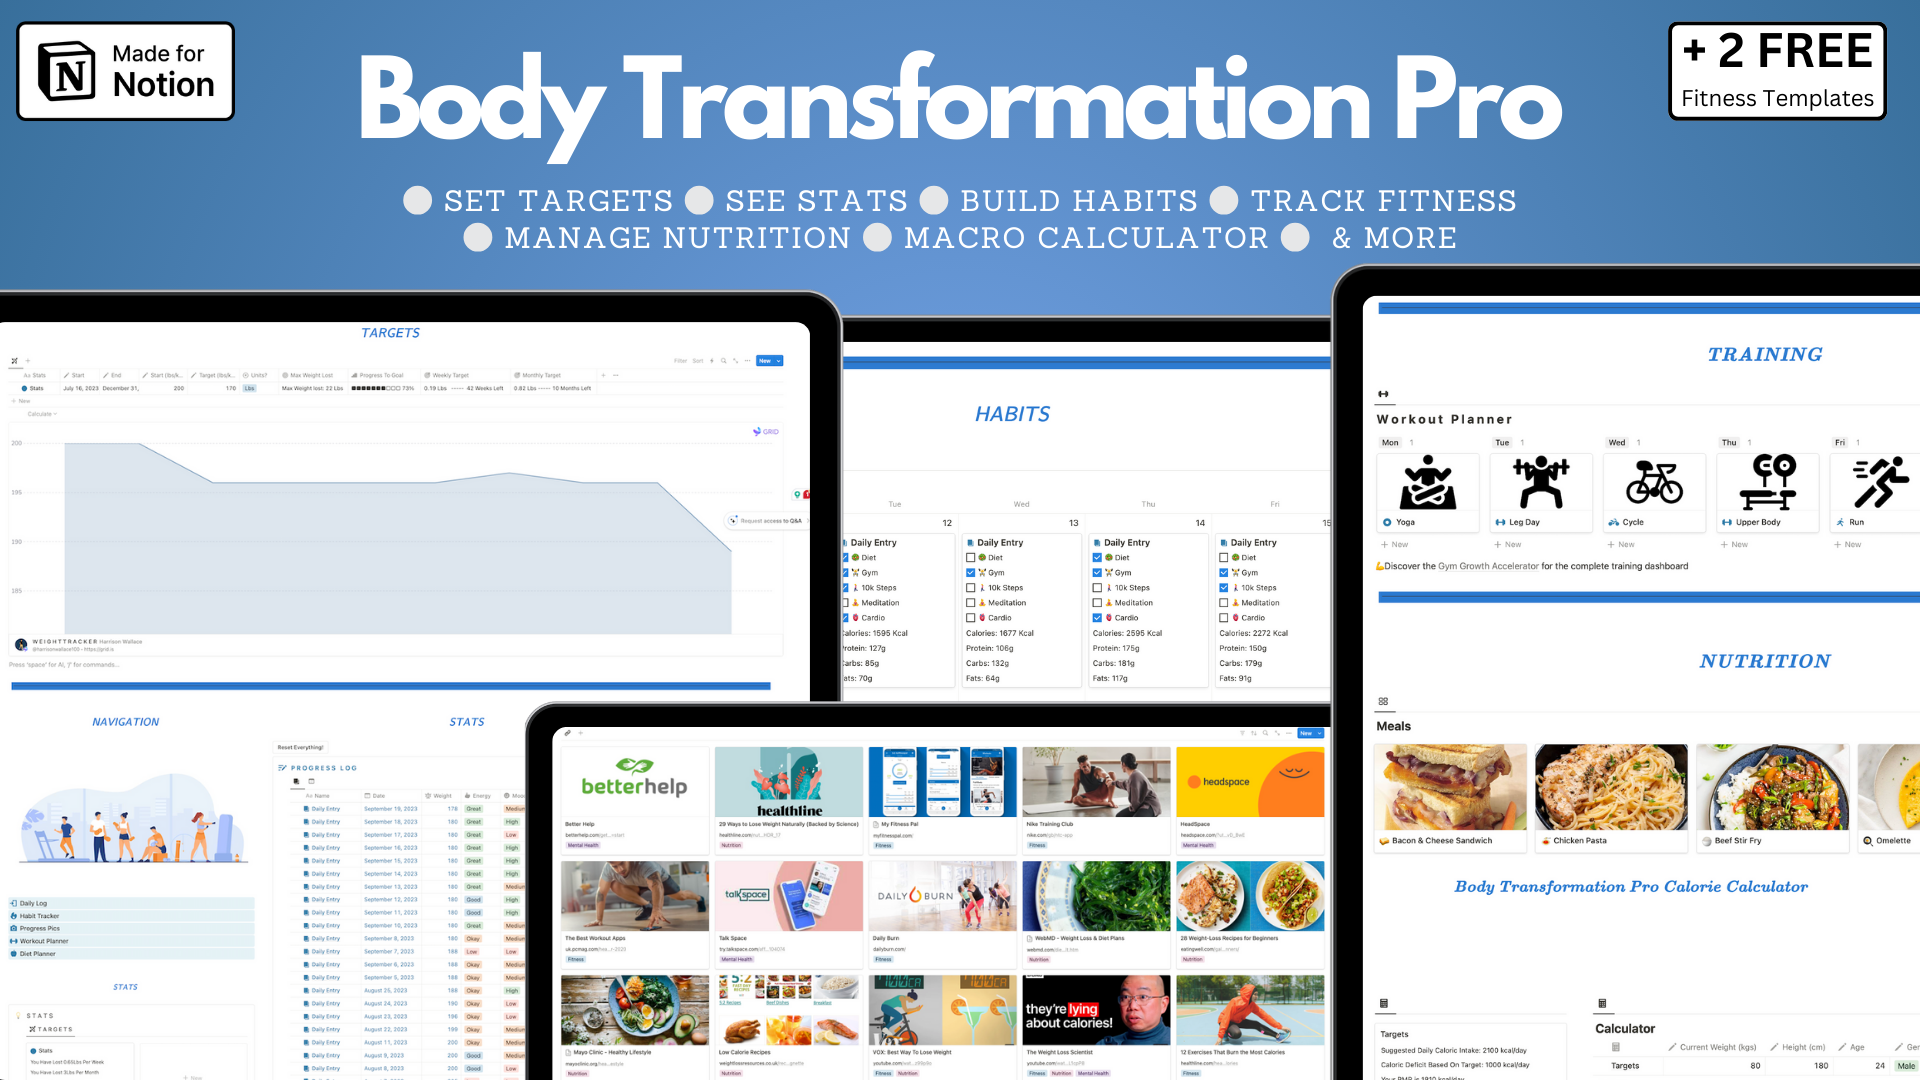 The best tool to transform your body in the next 100 days! Set weight targets, track progress, manage nutrition, build habits, meal plan, phone view, fitness, online resources, body measurements, 2 free gifts, a money-back guarantee, lifetime improvements & more!